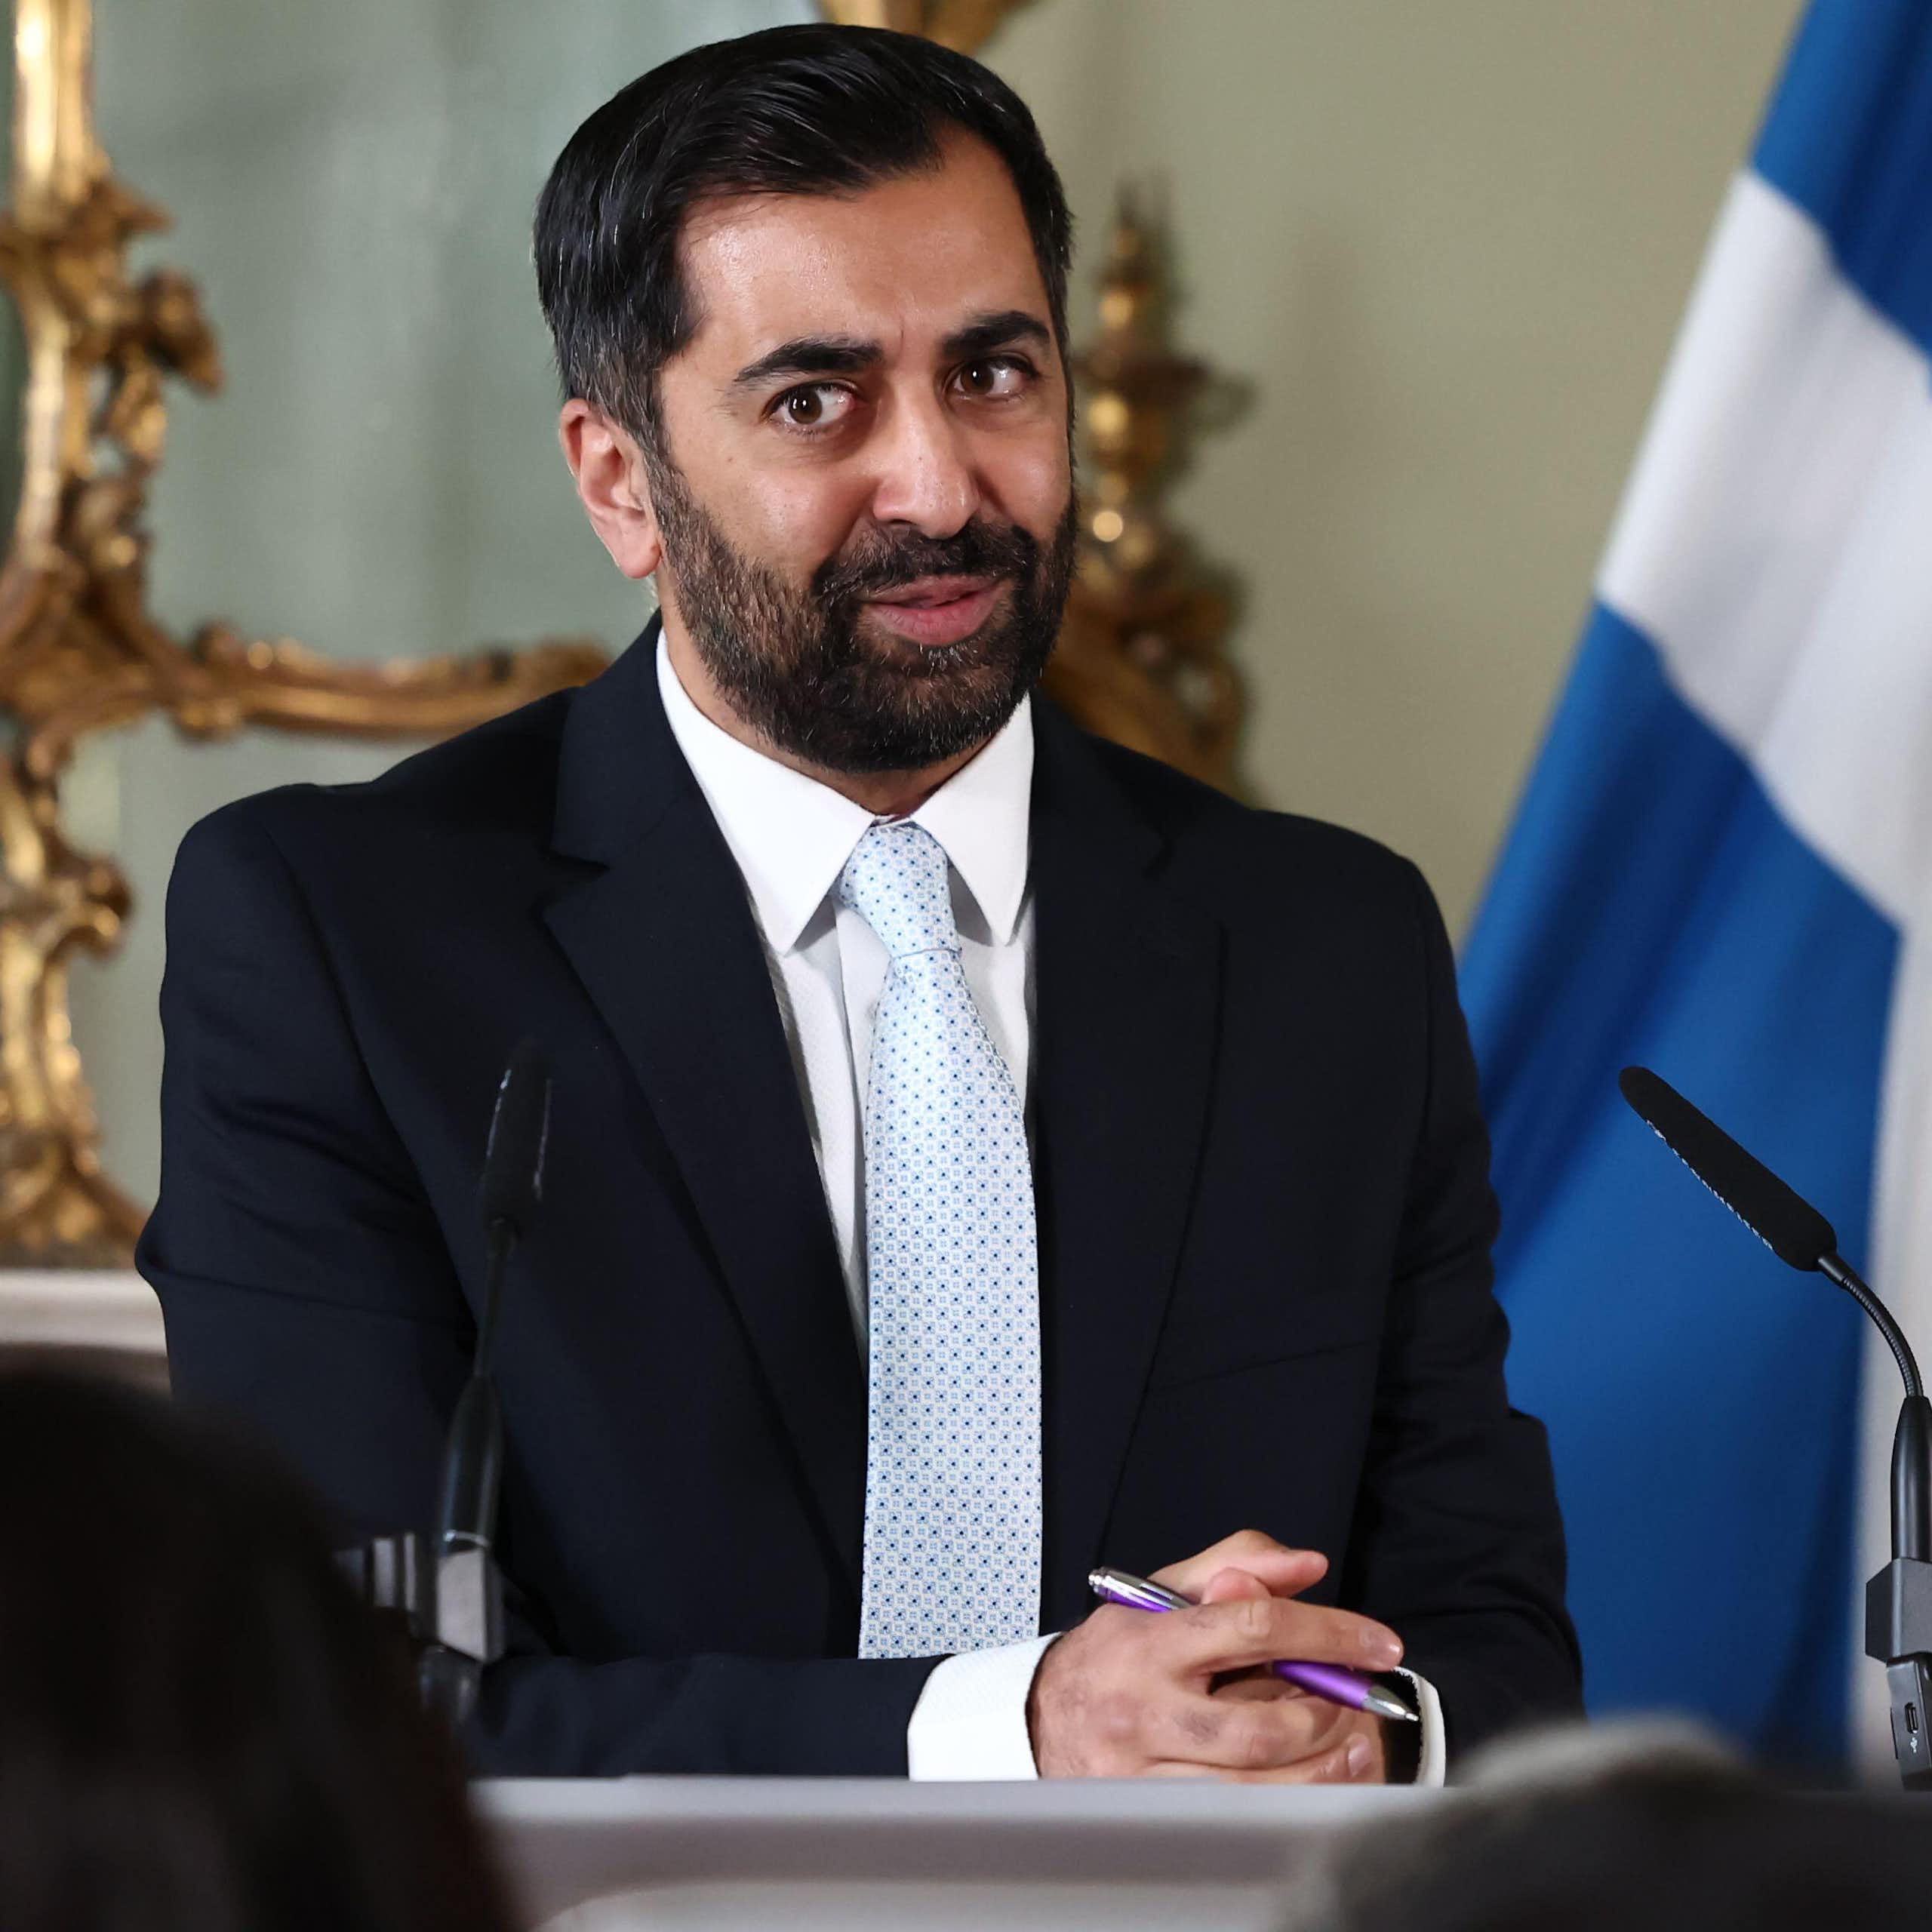 Humza Yousaf giving a speech in front of a Scottish flag. 